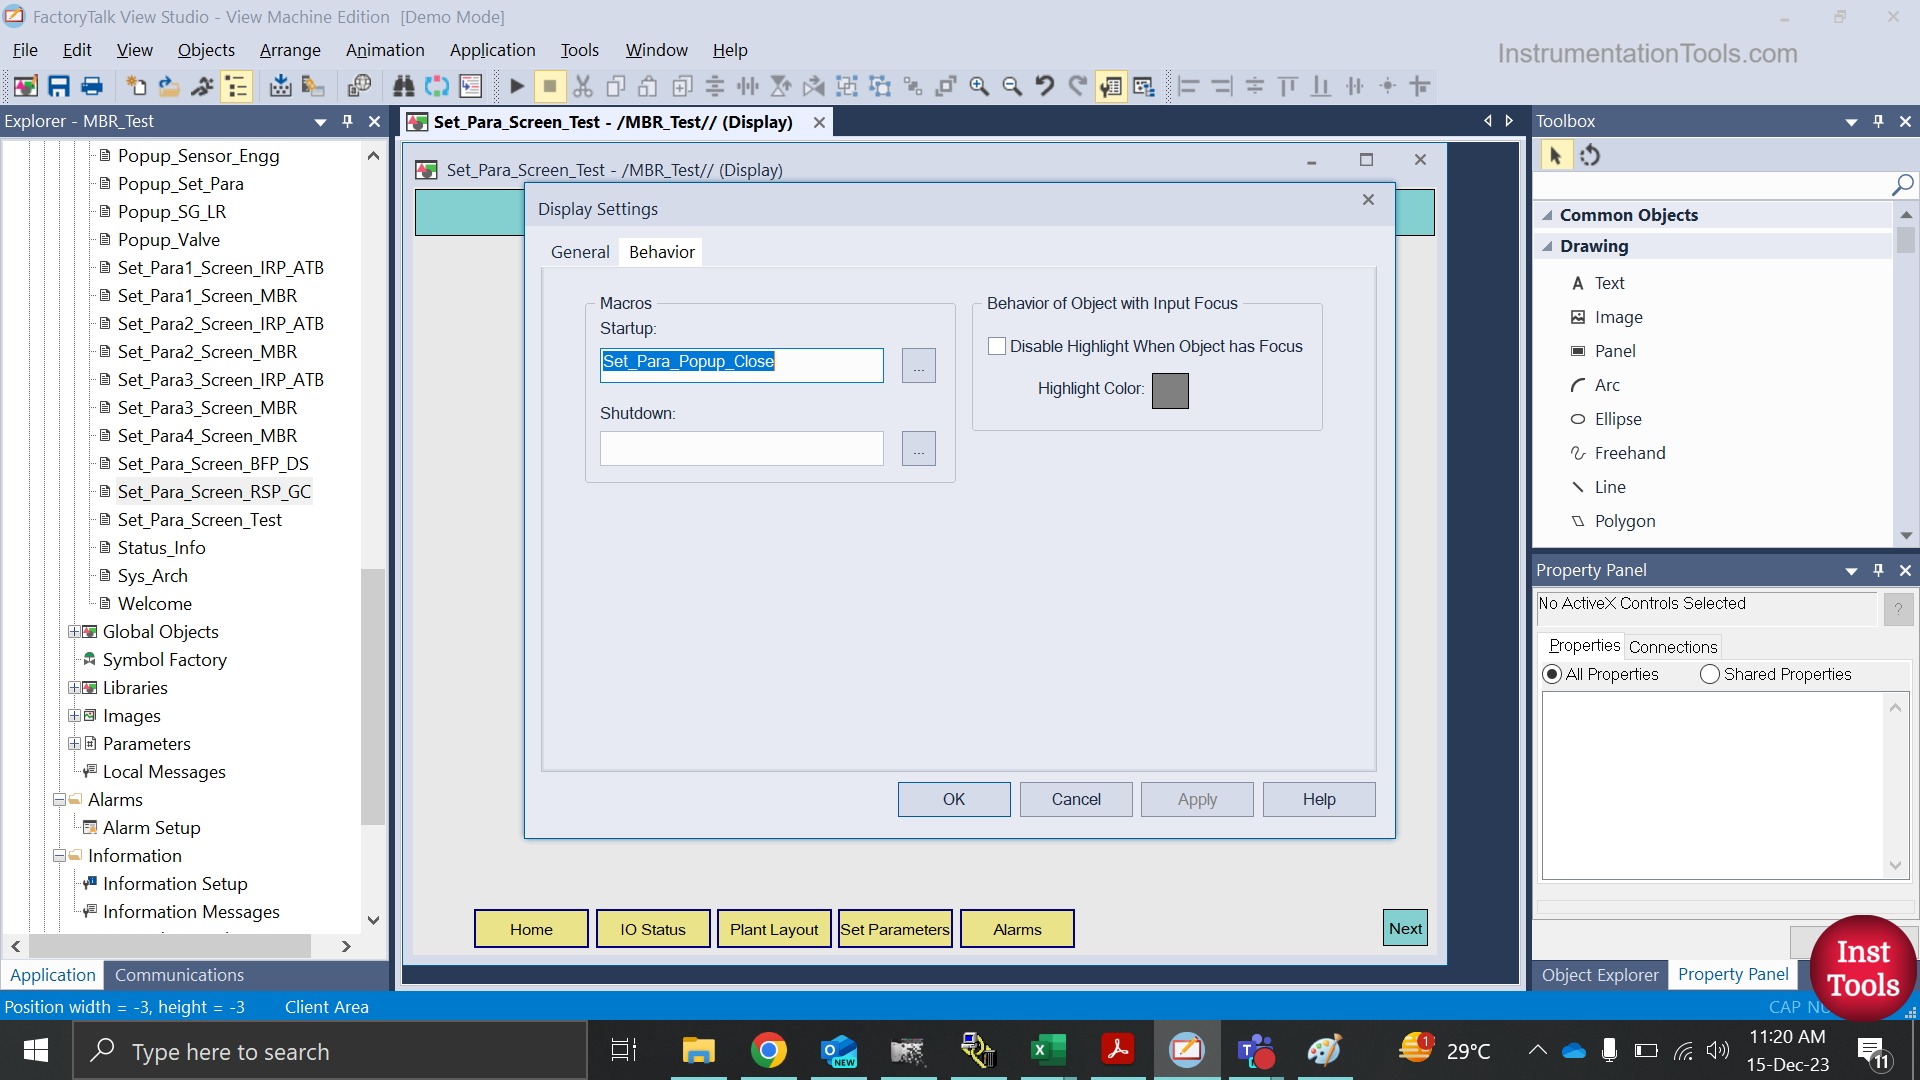 How to Configure FactoryTalk View Pop Up